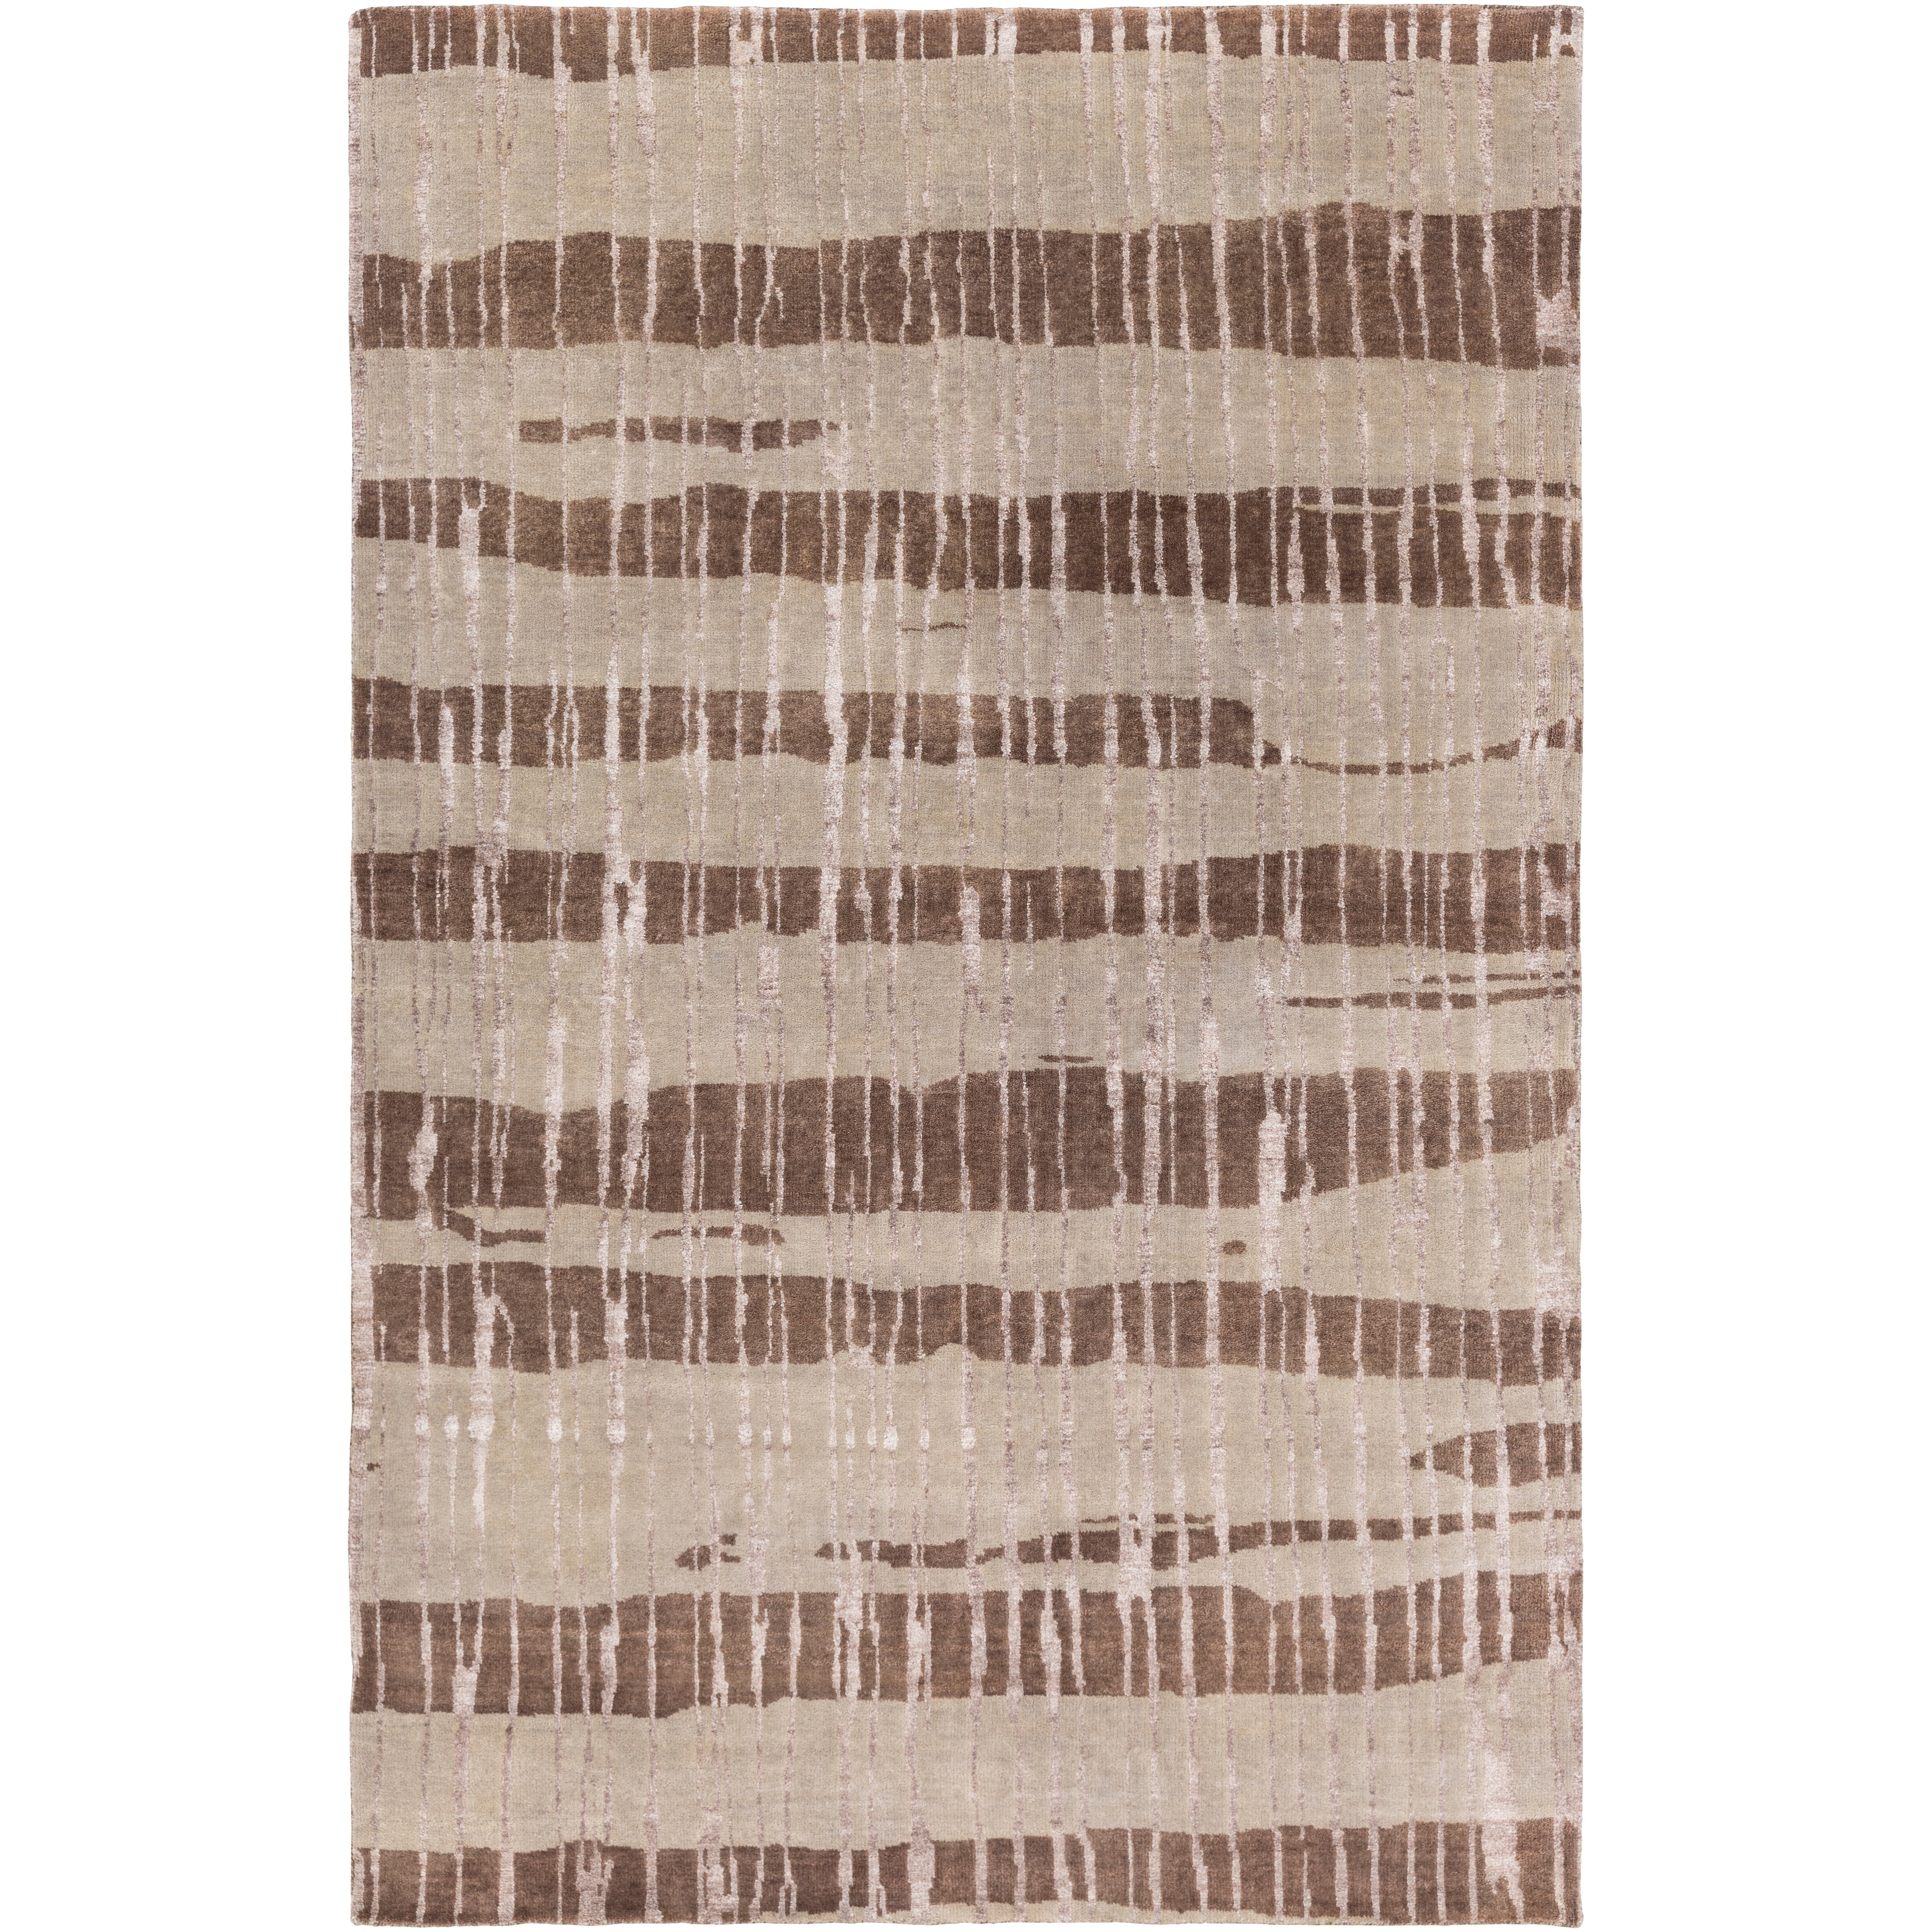 NOVICA Handmade Colors from The Silk Road Wool Area Rug (2.5x4) - 2' x 6' Runner - Multi